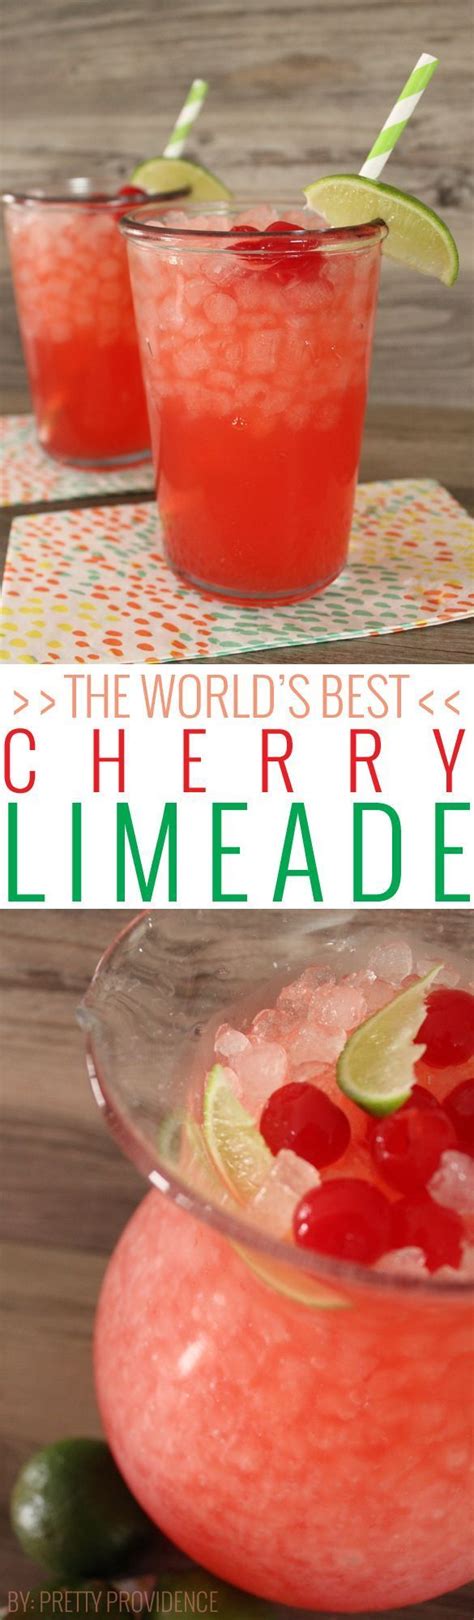 The Worlds Best Cherry Limeade Recipe With Images Food Drink